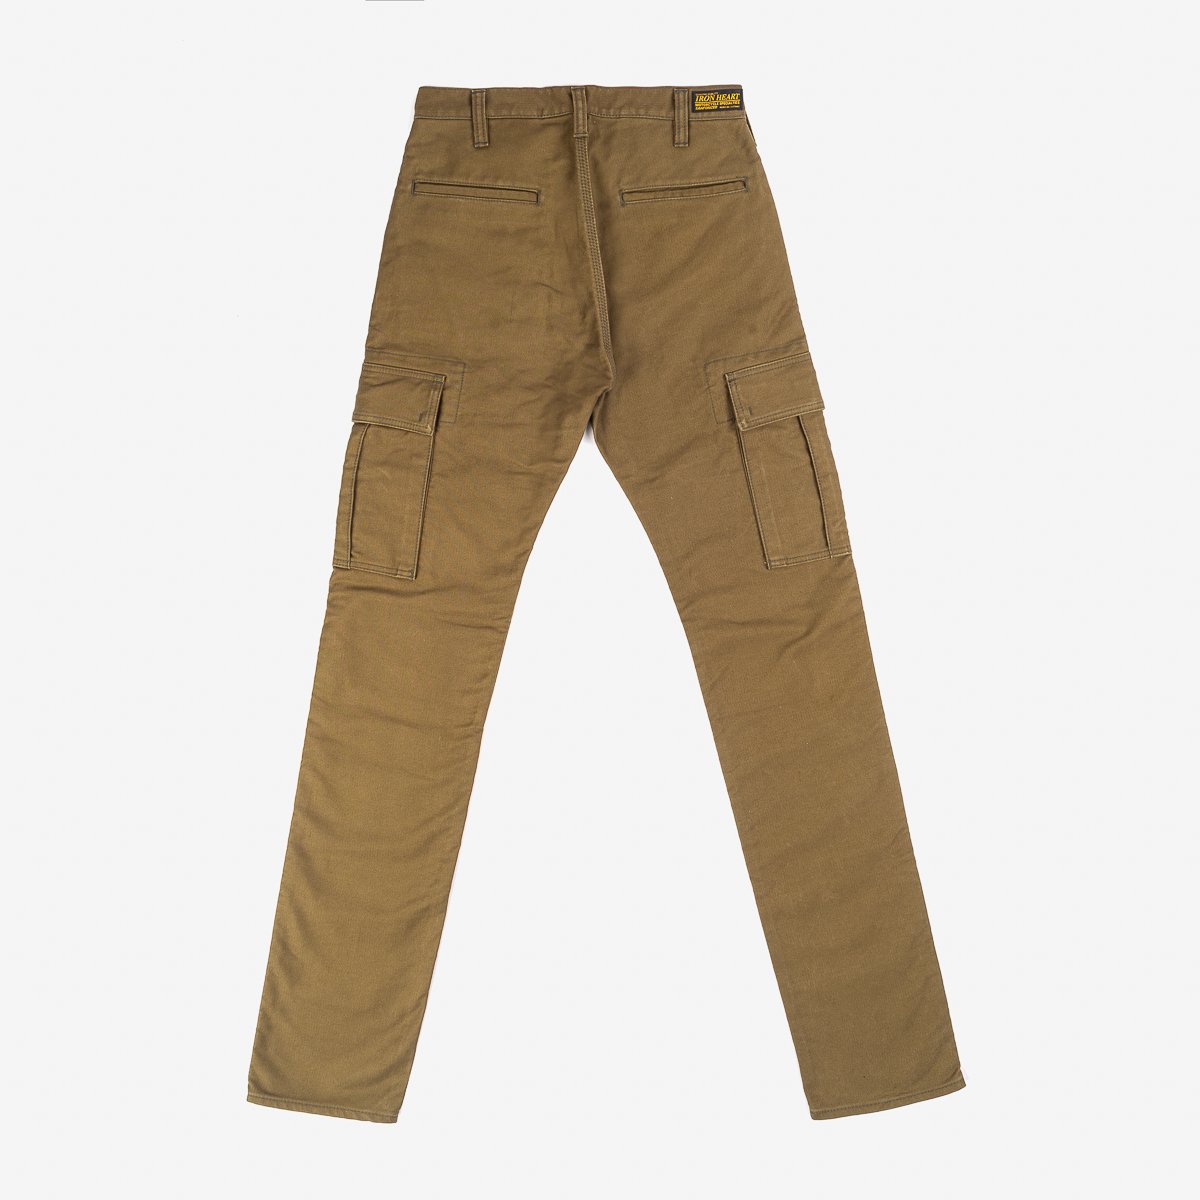 Iron Heart x Division Road 11oz Cotton Whipcord Cargo Pants